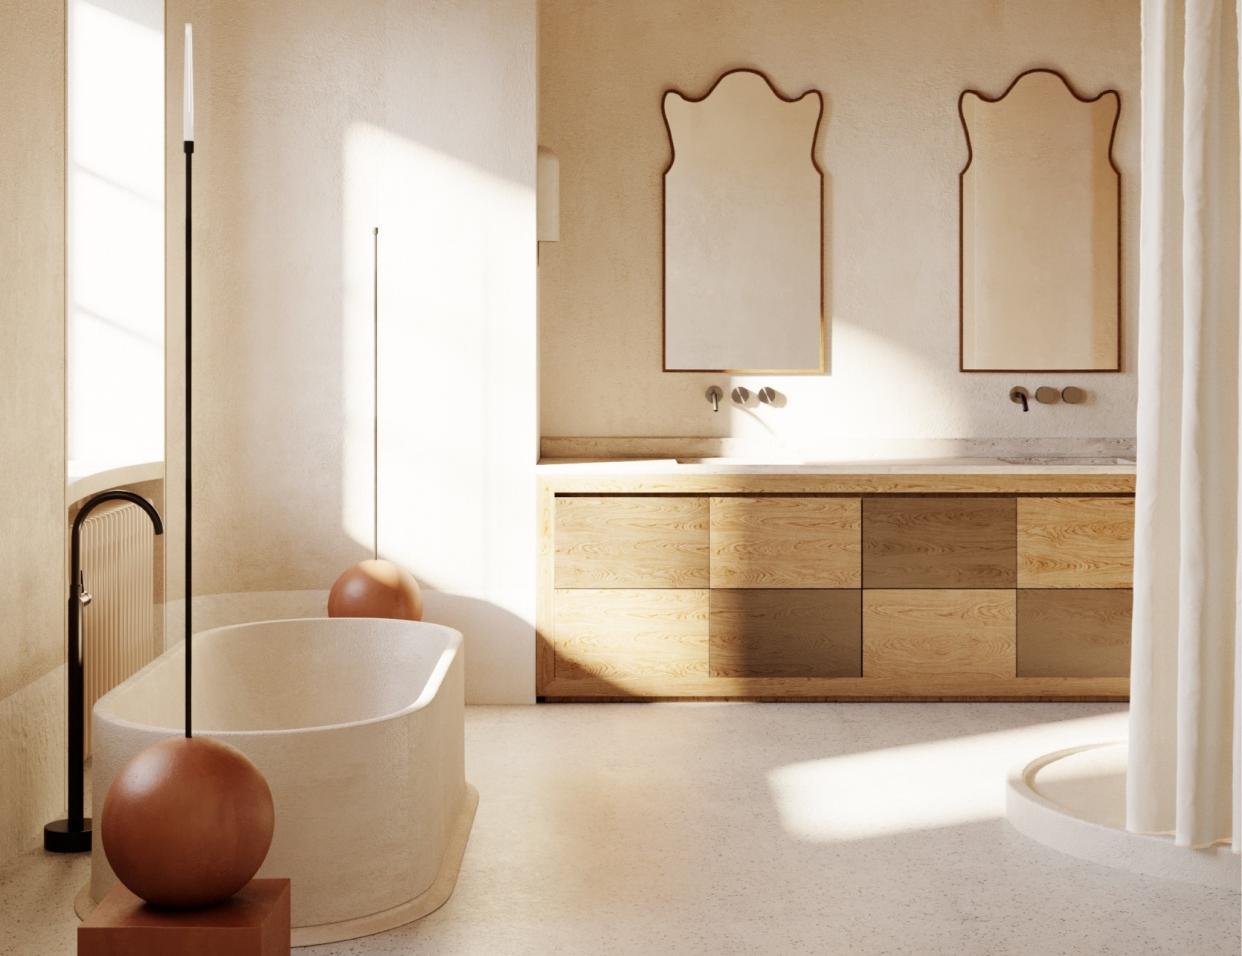  A bathroom made in natural materials with two organic-shaped mirrors adding a touch of elegance. 